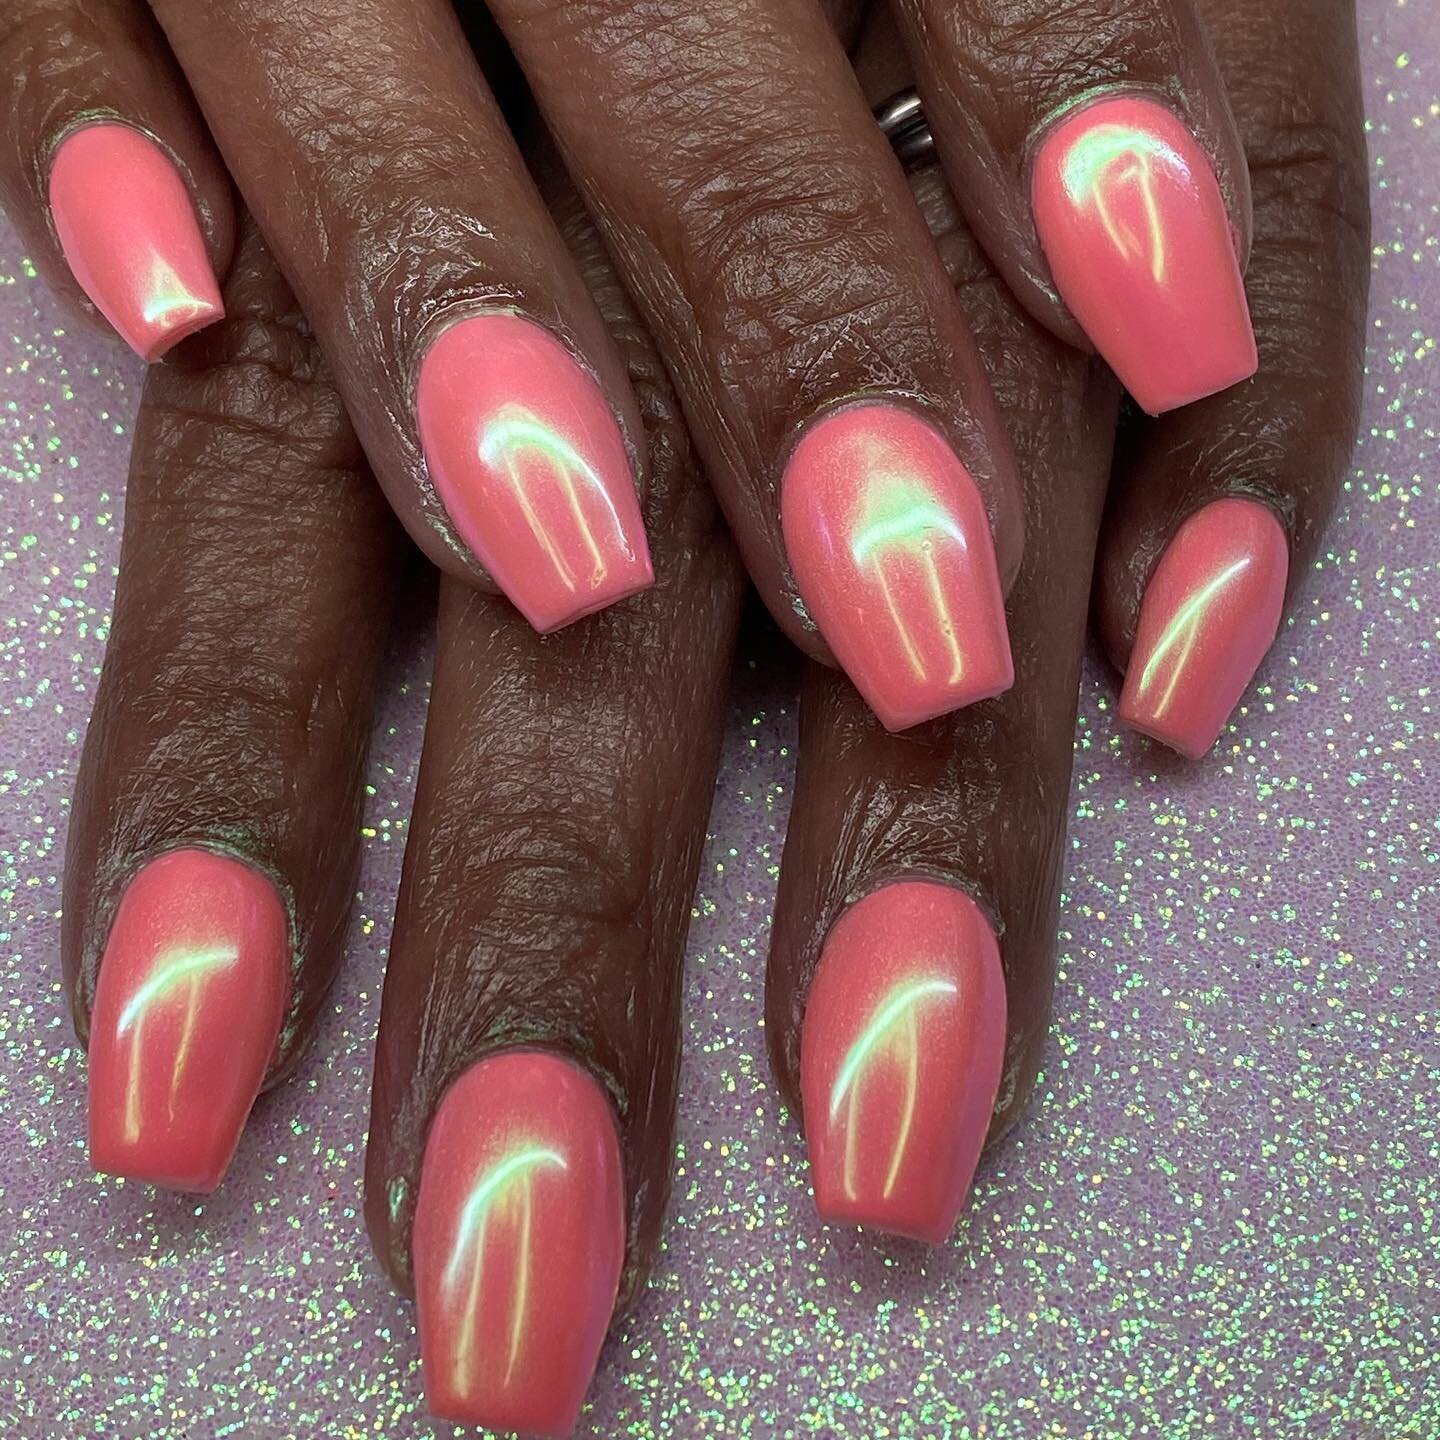 https://sivaboutiqueandnailbar.as.me/ #chromenails #acrylicnails #shortnails #gelpolish #nailsoftheday #pamperyourself #appointmentsavailable #appointmentsonly #supportlocal #supportsmallbusiness #homewood #homewoodalabama #SivaBoutique #SivaBoutique